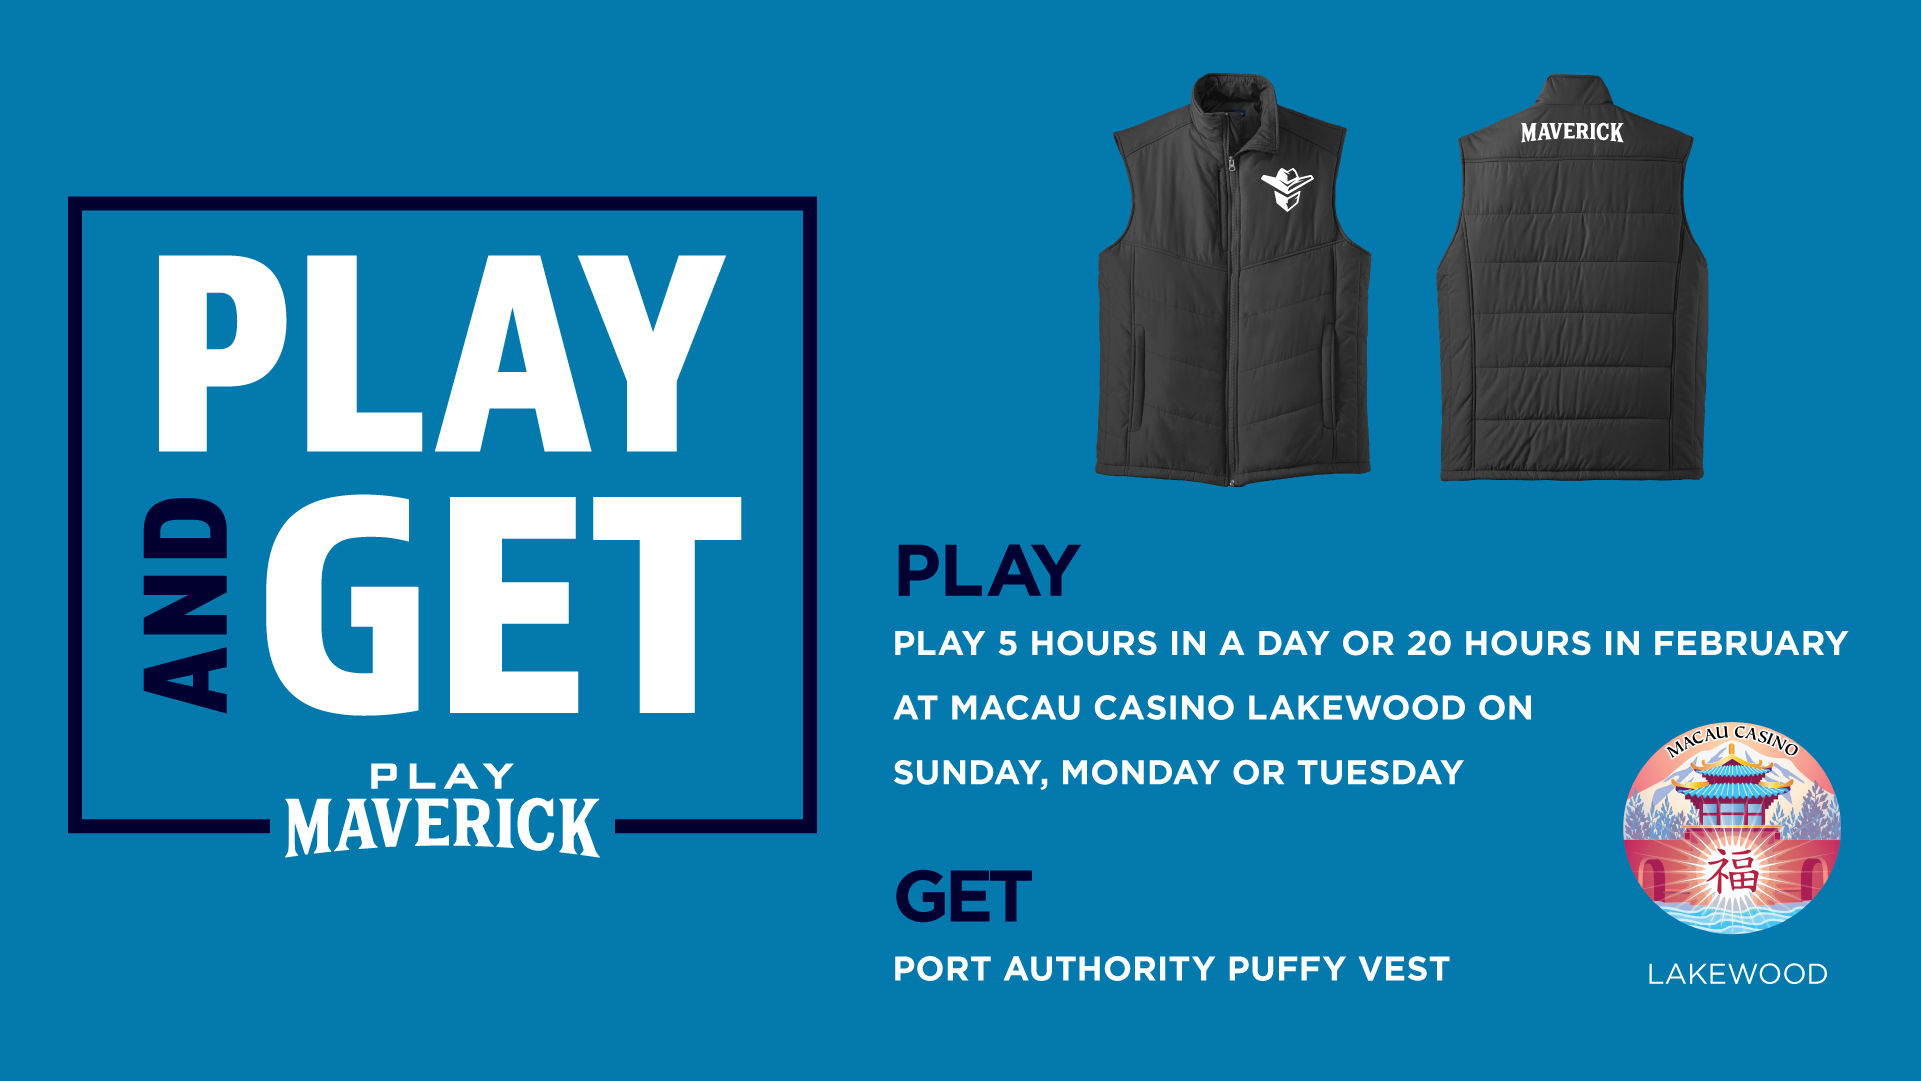 Play and Get | Macau Casino Lakewood Play 5 hours in a day or 20 hours in February at Macau Casino Lakewood on Sunday, Monday or Tuesday Get Port Authority Puffy Vest